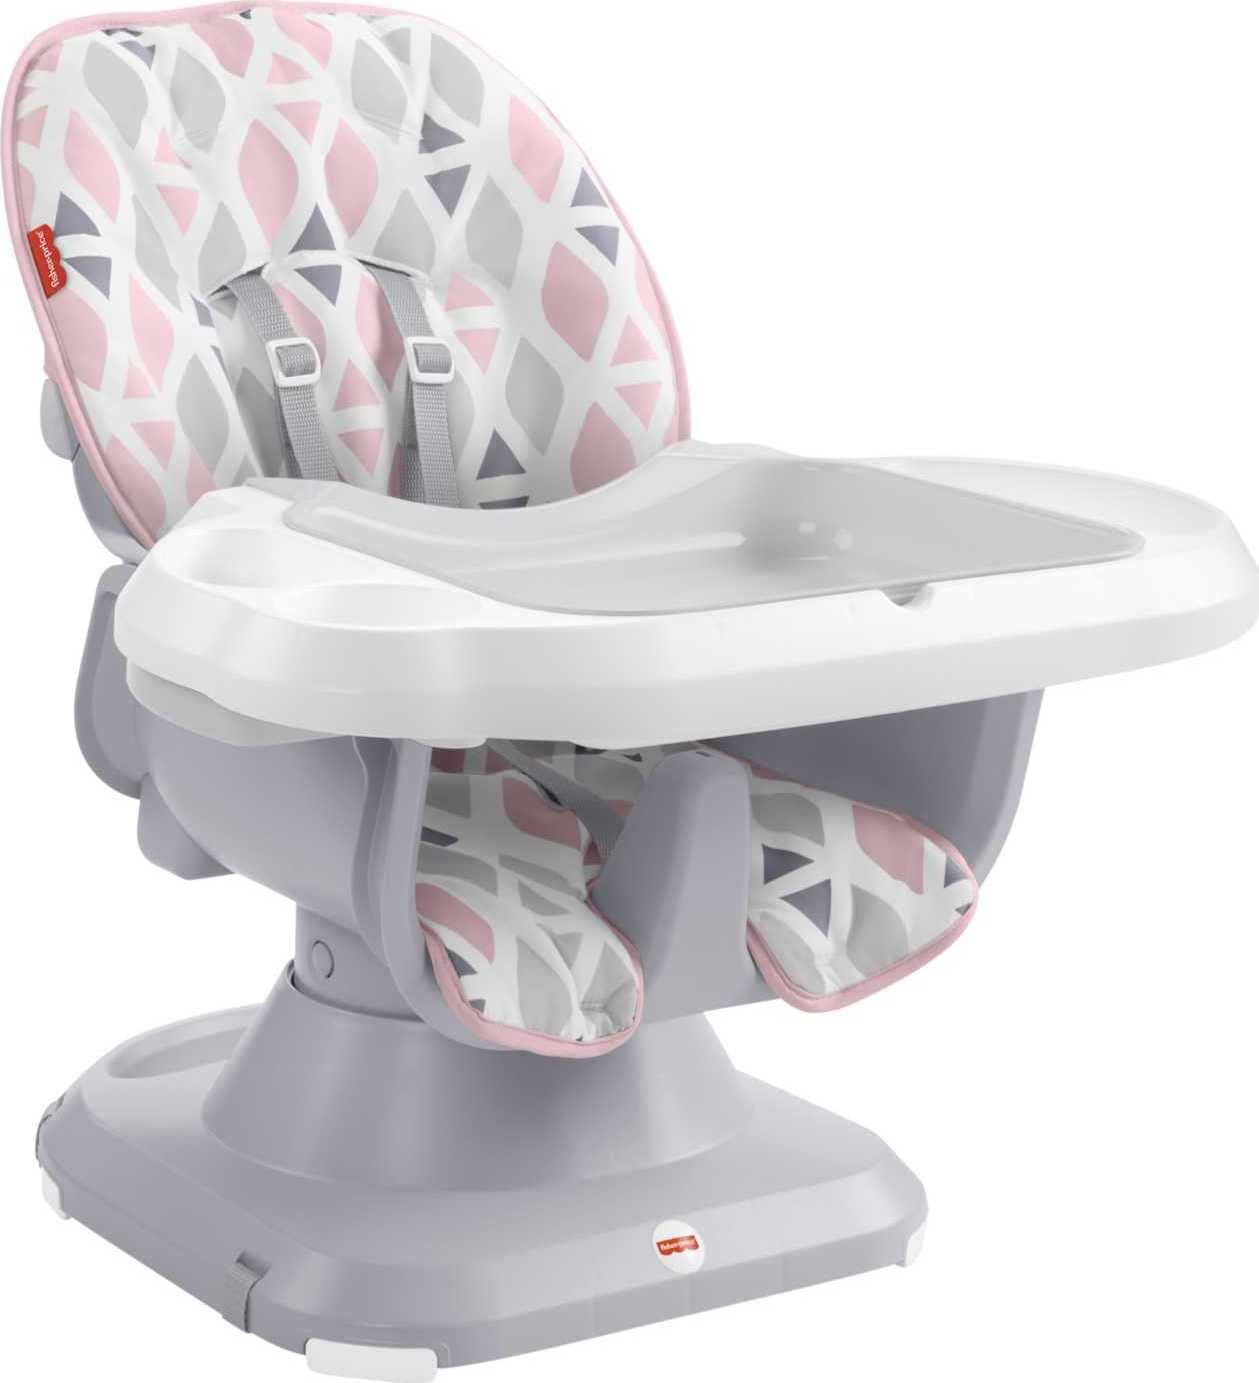 Fisher-Price SpaceSaver High Chair, Diamond Blush - with 2 height adjustments & 3 recline positions